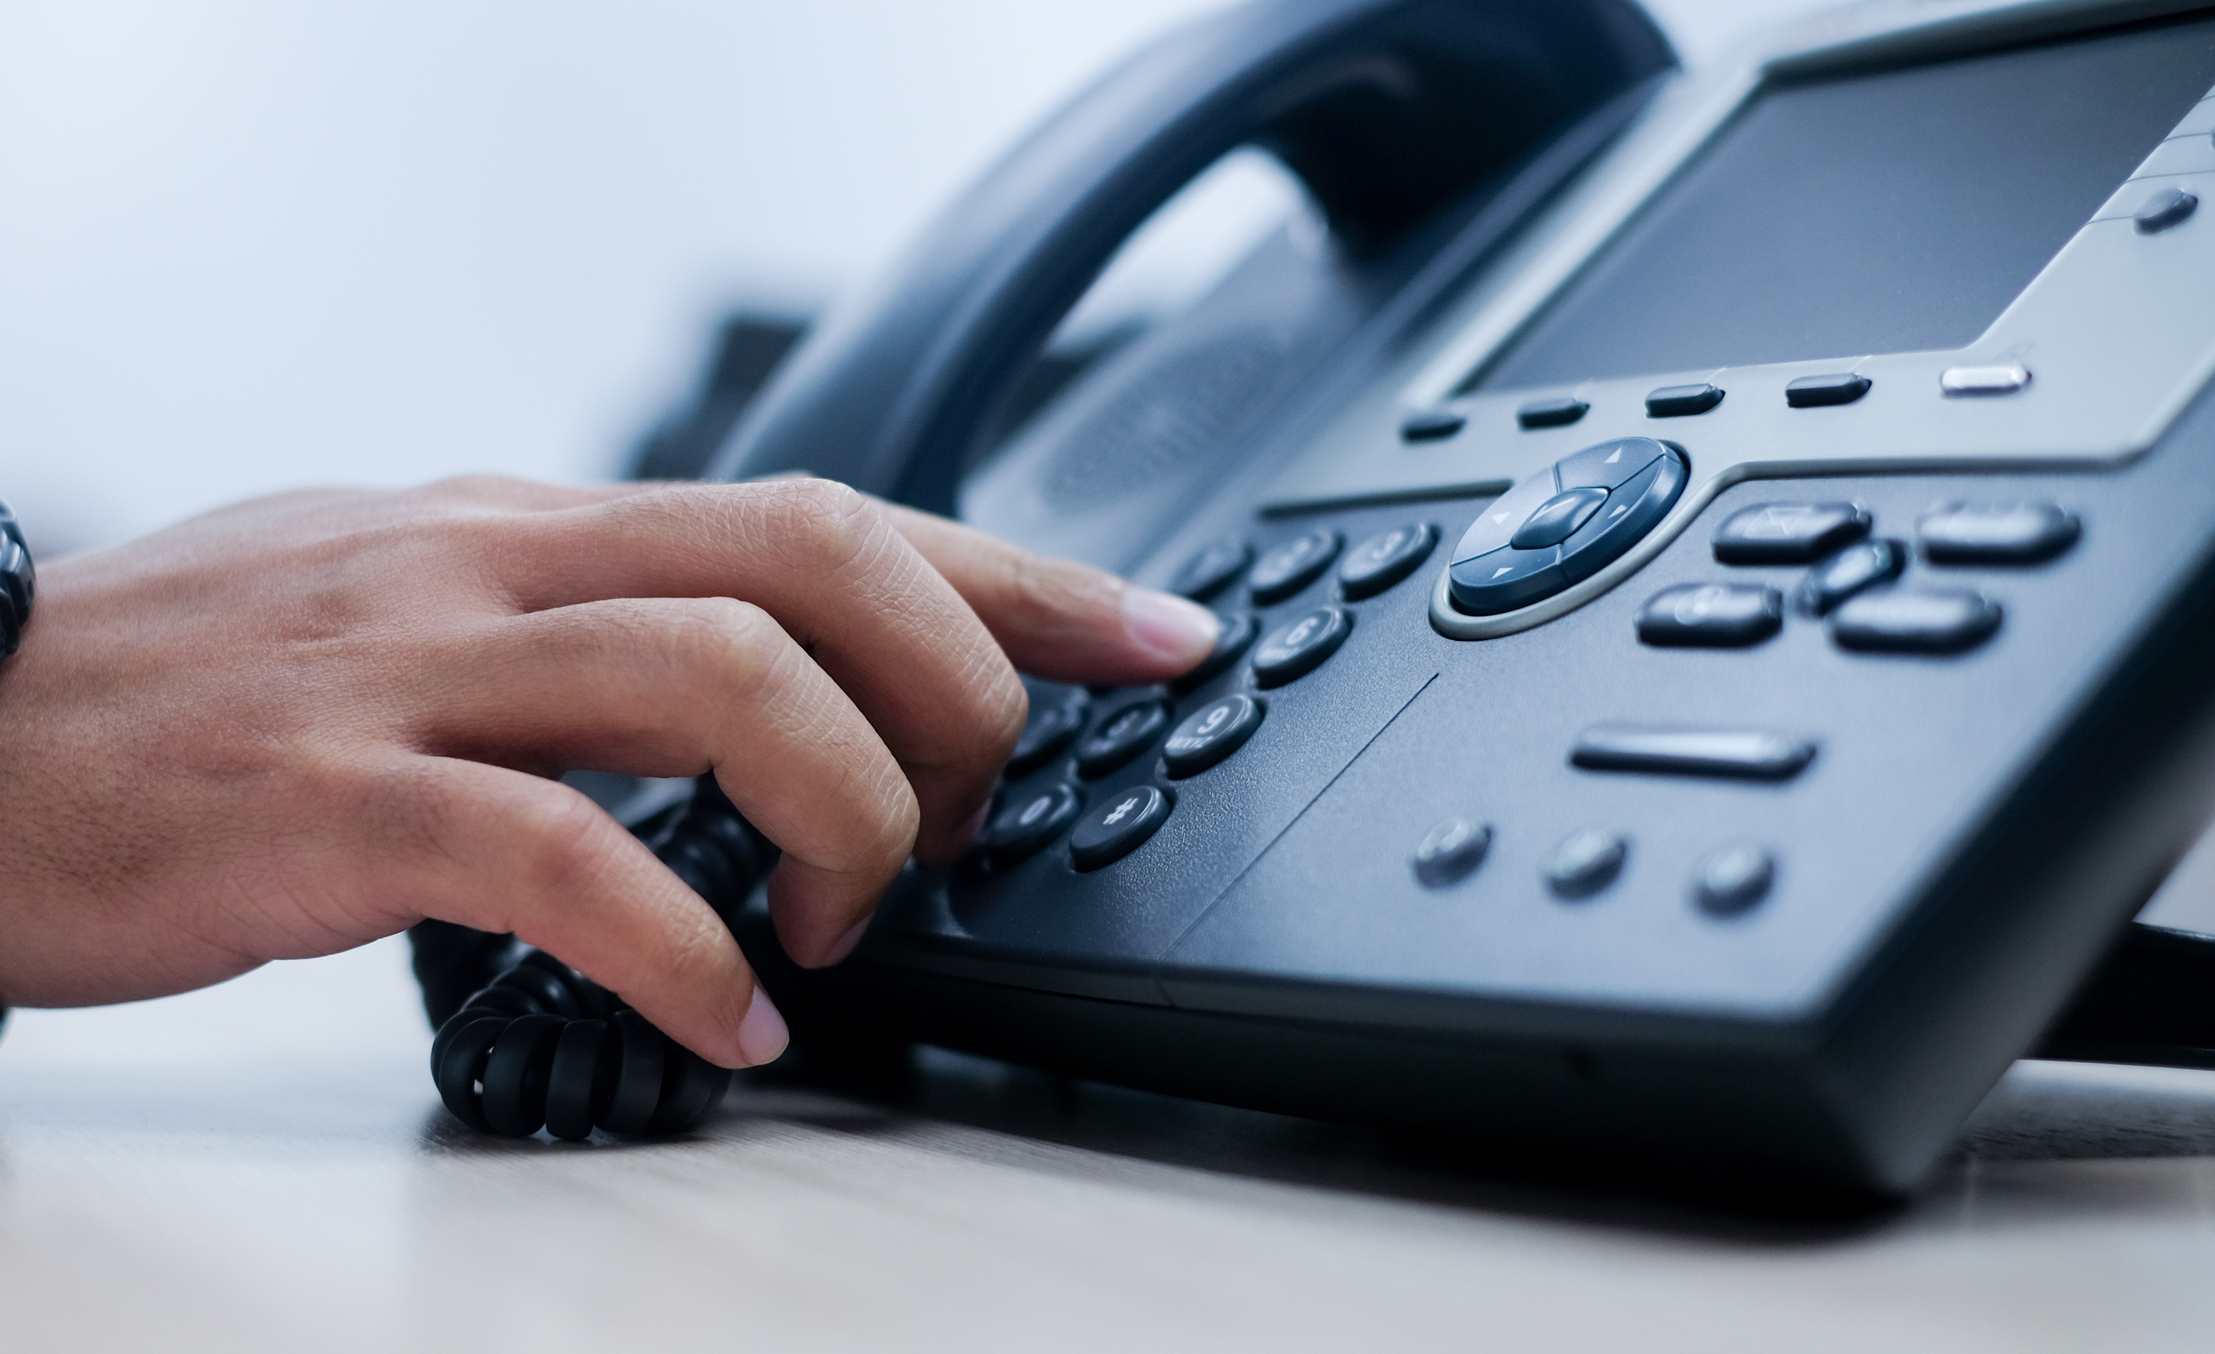 VoIP vs. Landline: Which Is Best for Your Business? - businessnewsdaily.com